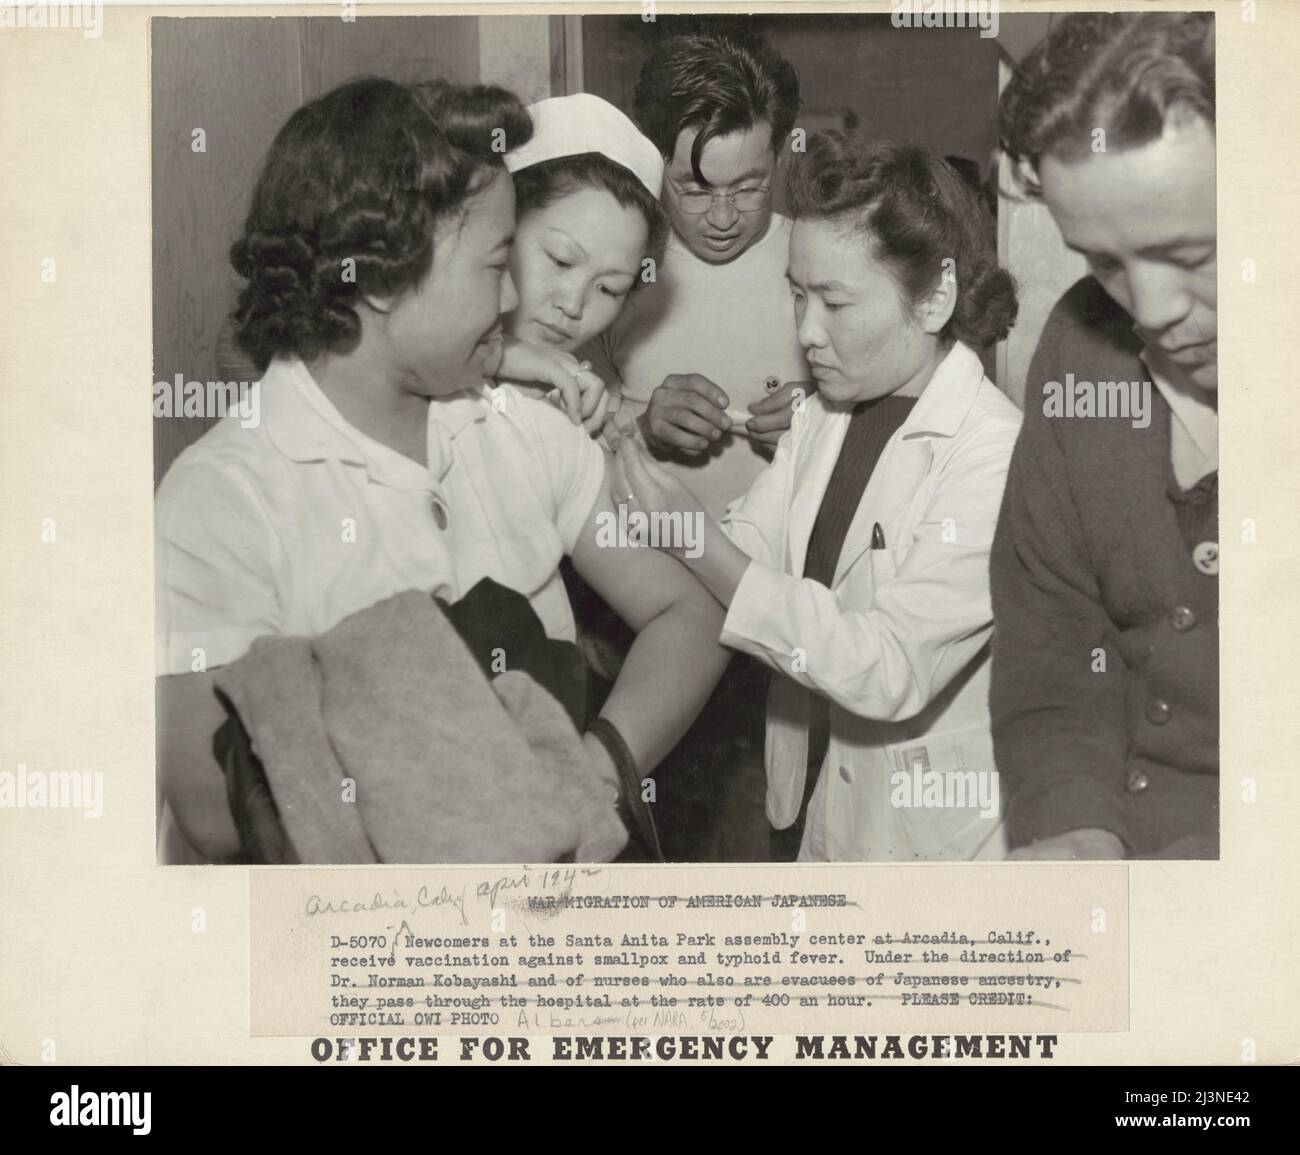 Japanese relocation, California. Newcomers at Santa Anita Park Assembly Center in Arcadia, California, receive vaccination against smallpox and typhoid fever. Under direction of Dr. Norman Kobayshi and nurses who also are evacuees of Japanese ancestry, they pass through the hospital at a rate of 400 an hour. Evacuees are transferred later to War Relocation Authority centers for the duration. Stock Photo